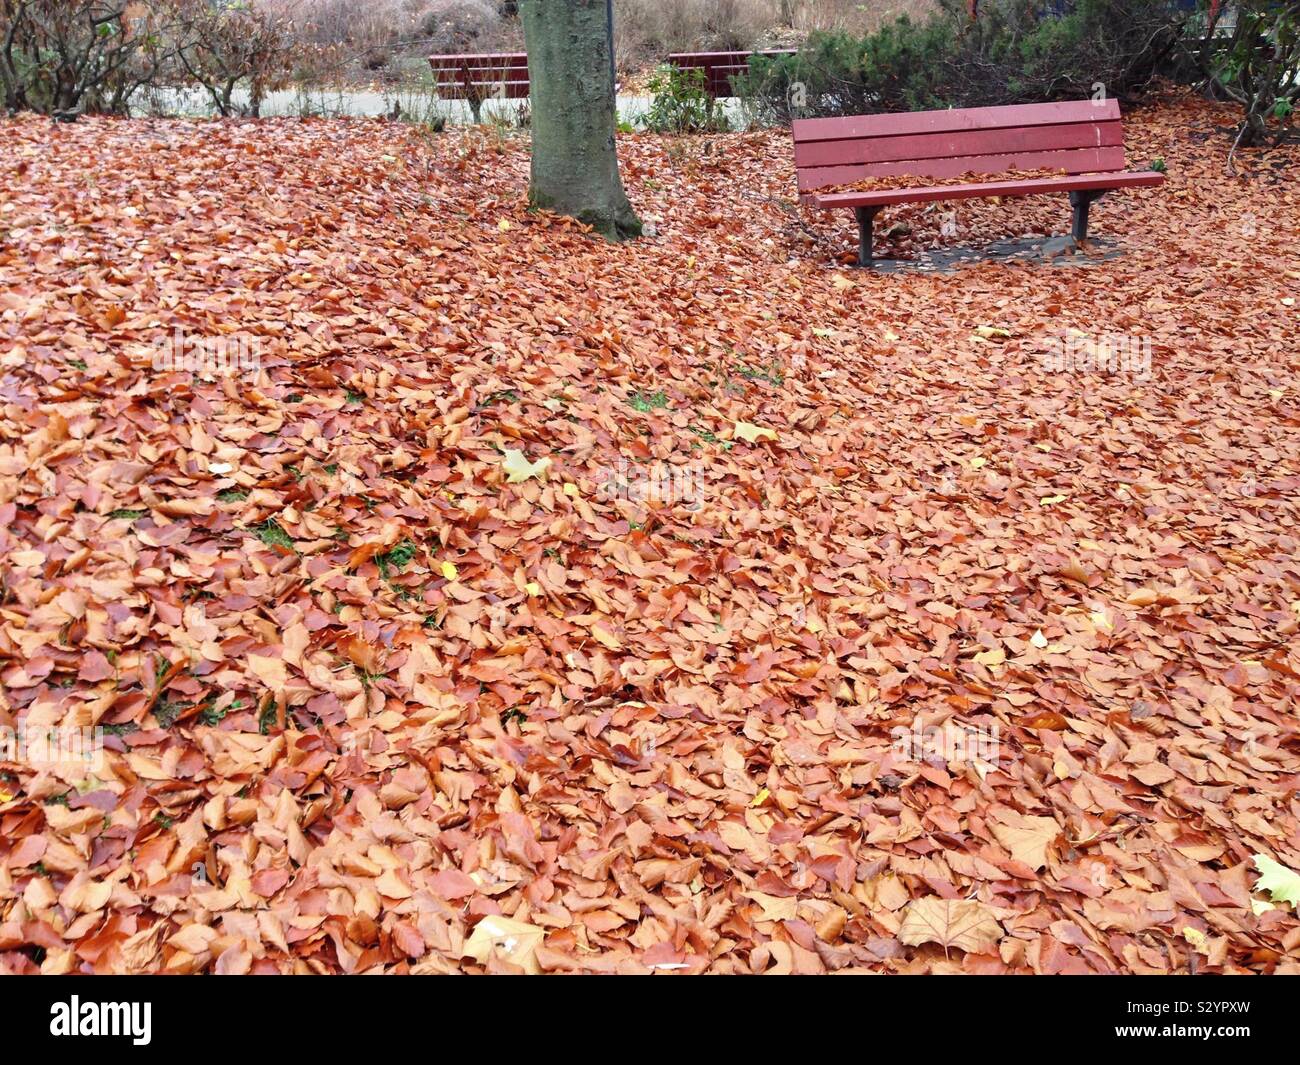 Sycamore, birch tree and other deciduous tree leaves covering the ground forming a stunning layer of romantic scenery full of color textures and patterns next to a wooden bench. Sweden. Stock Photo